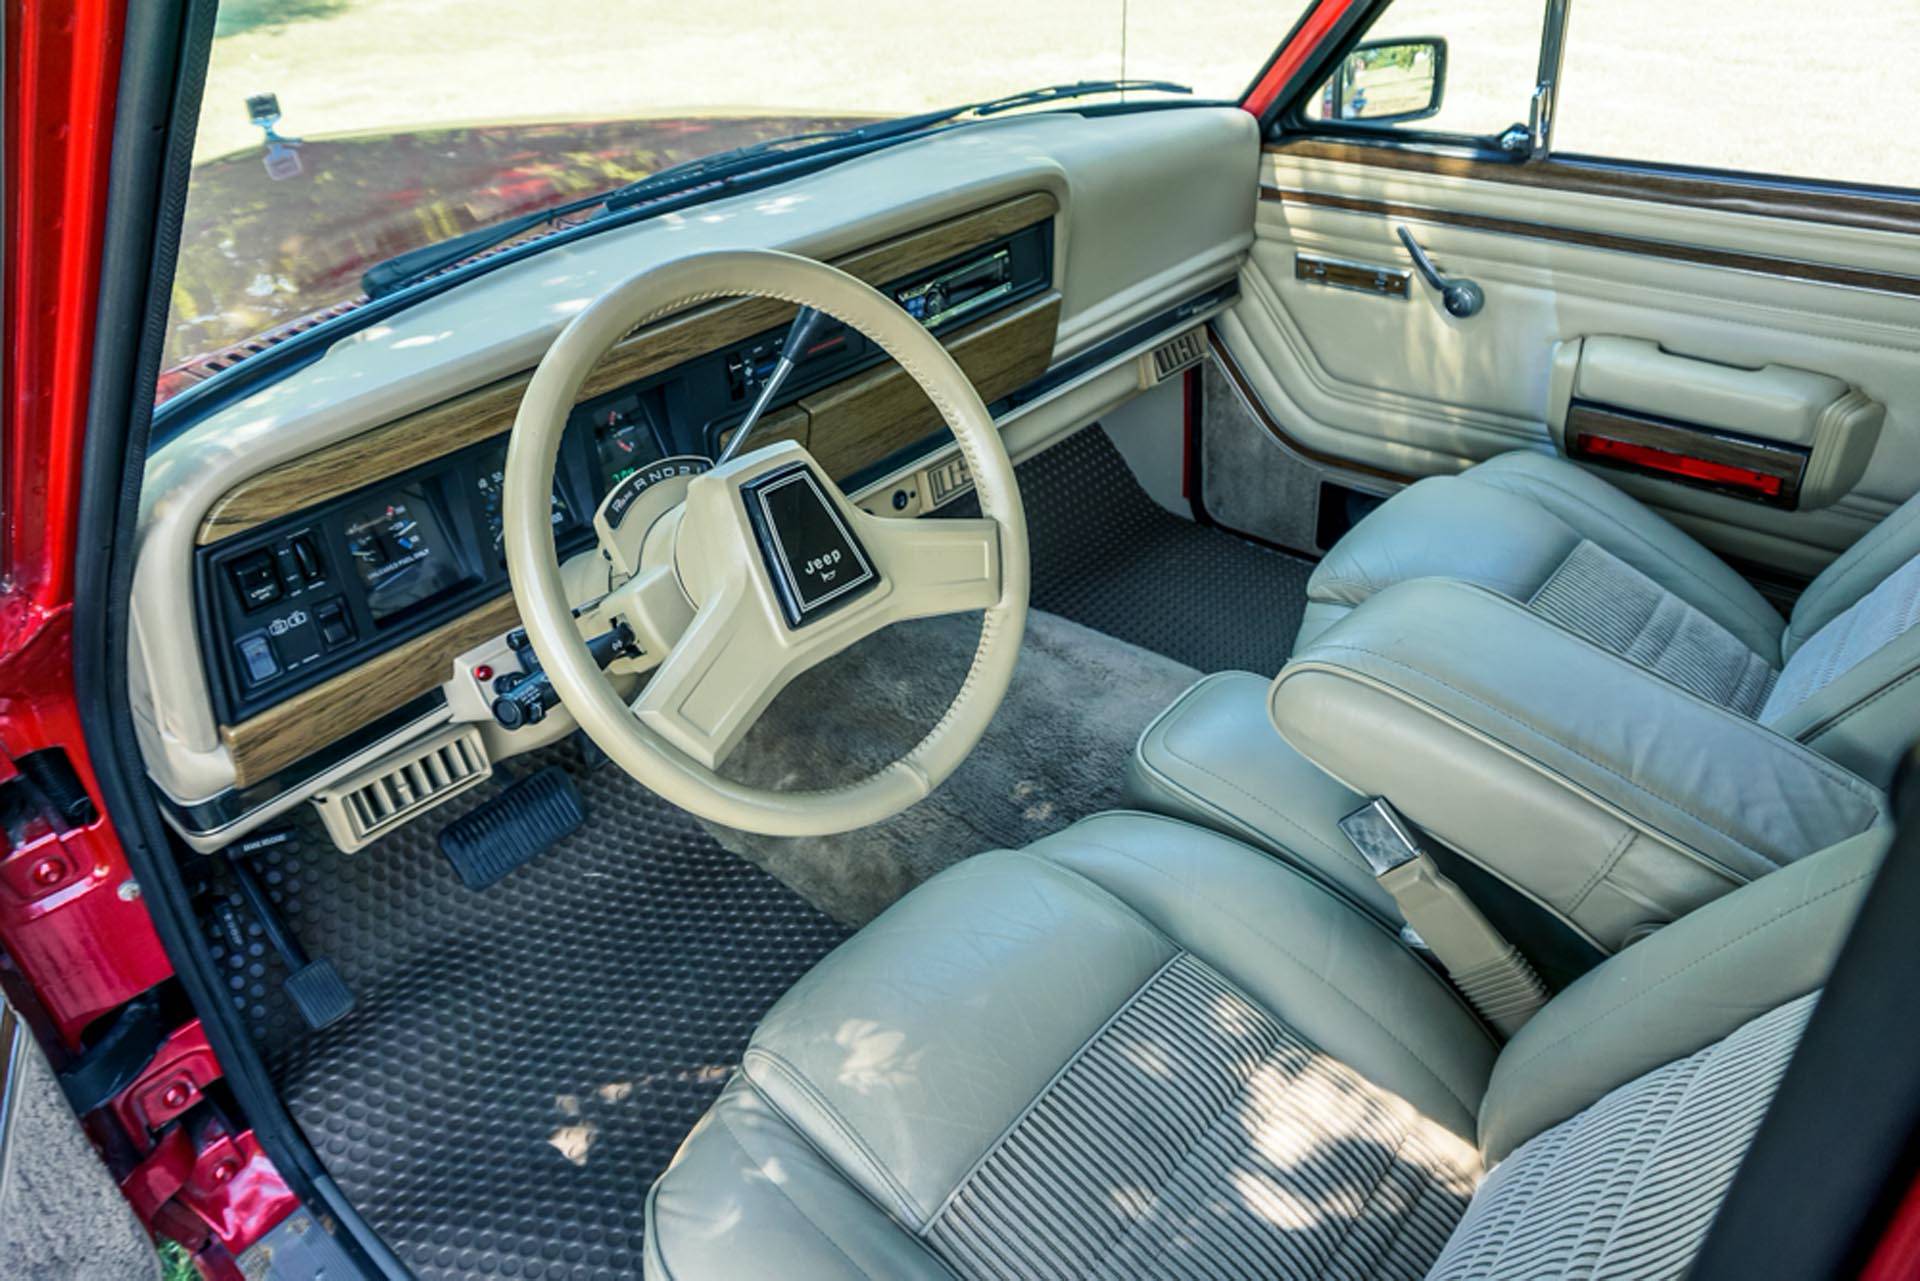 1989 Jeep Grand Wagoneer Woody Looks All Original But Hides